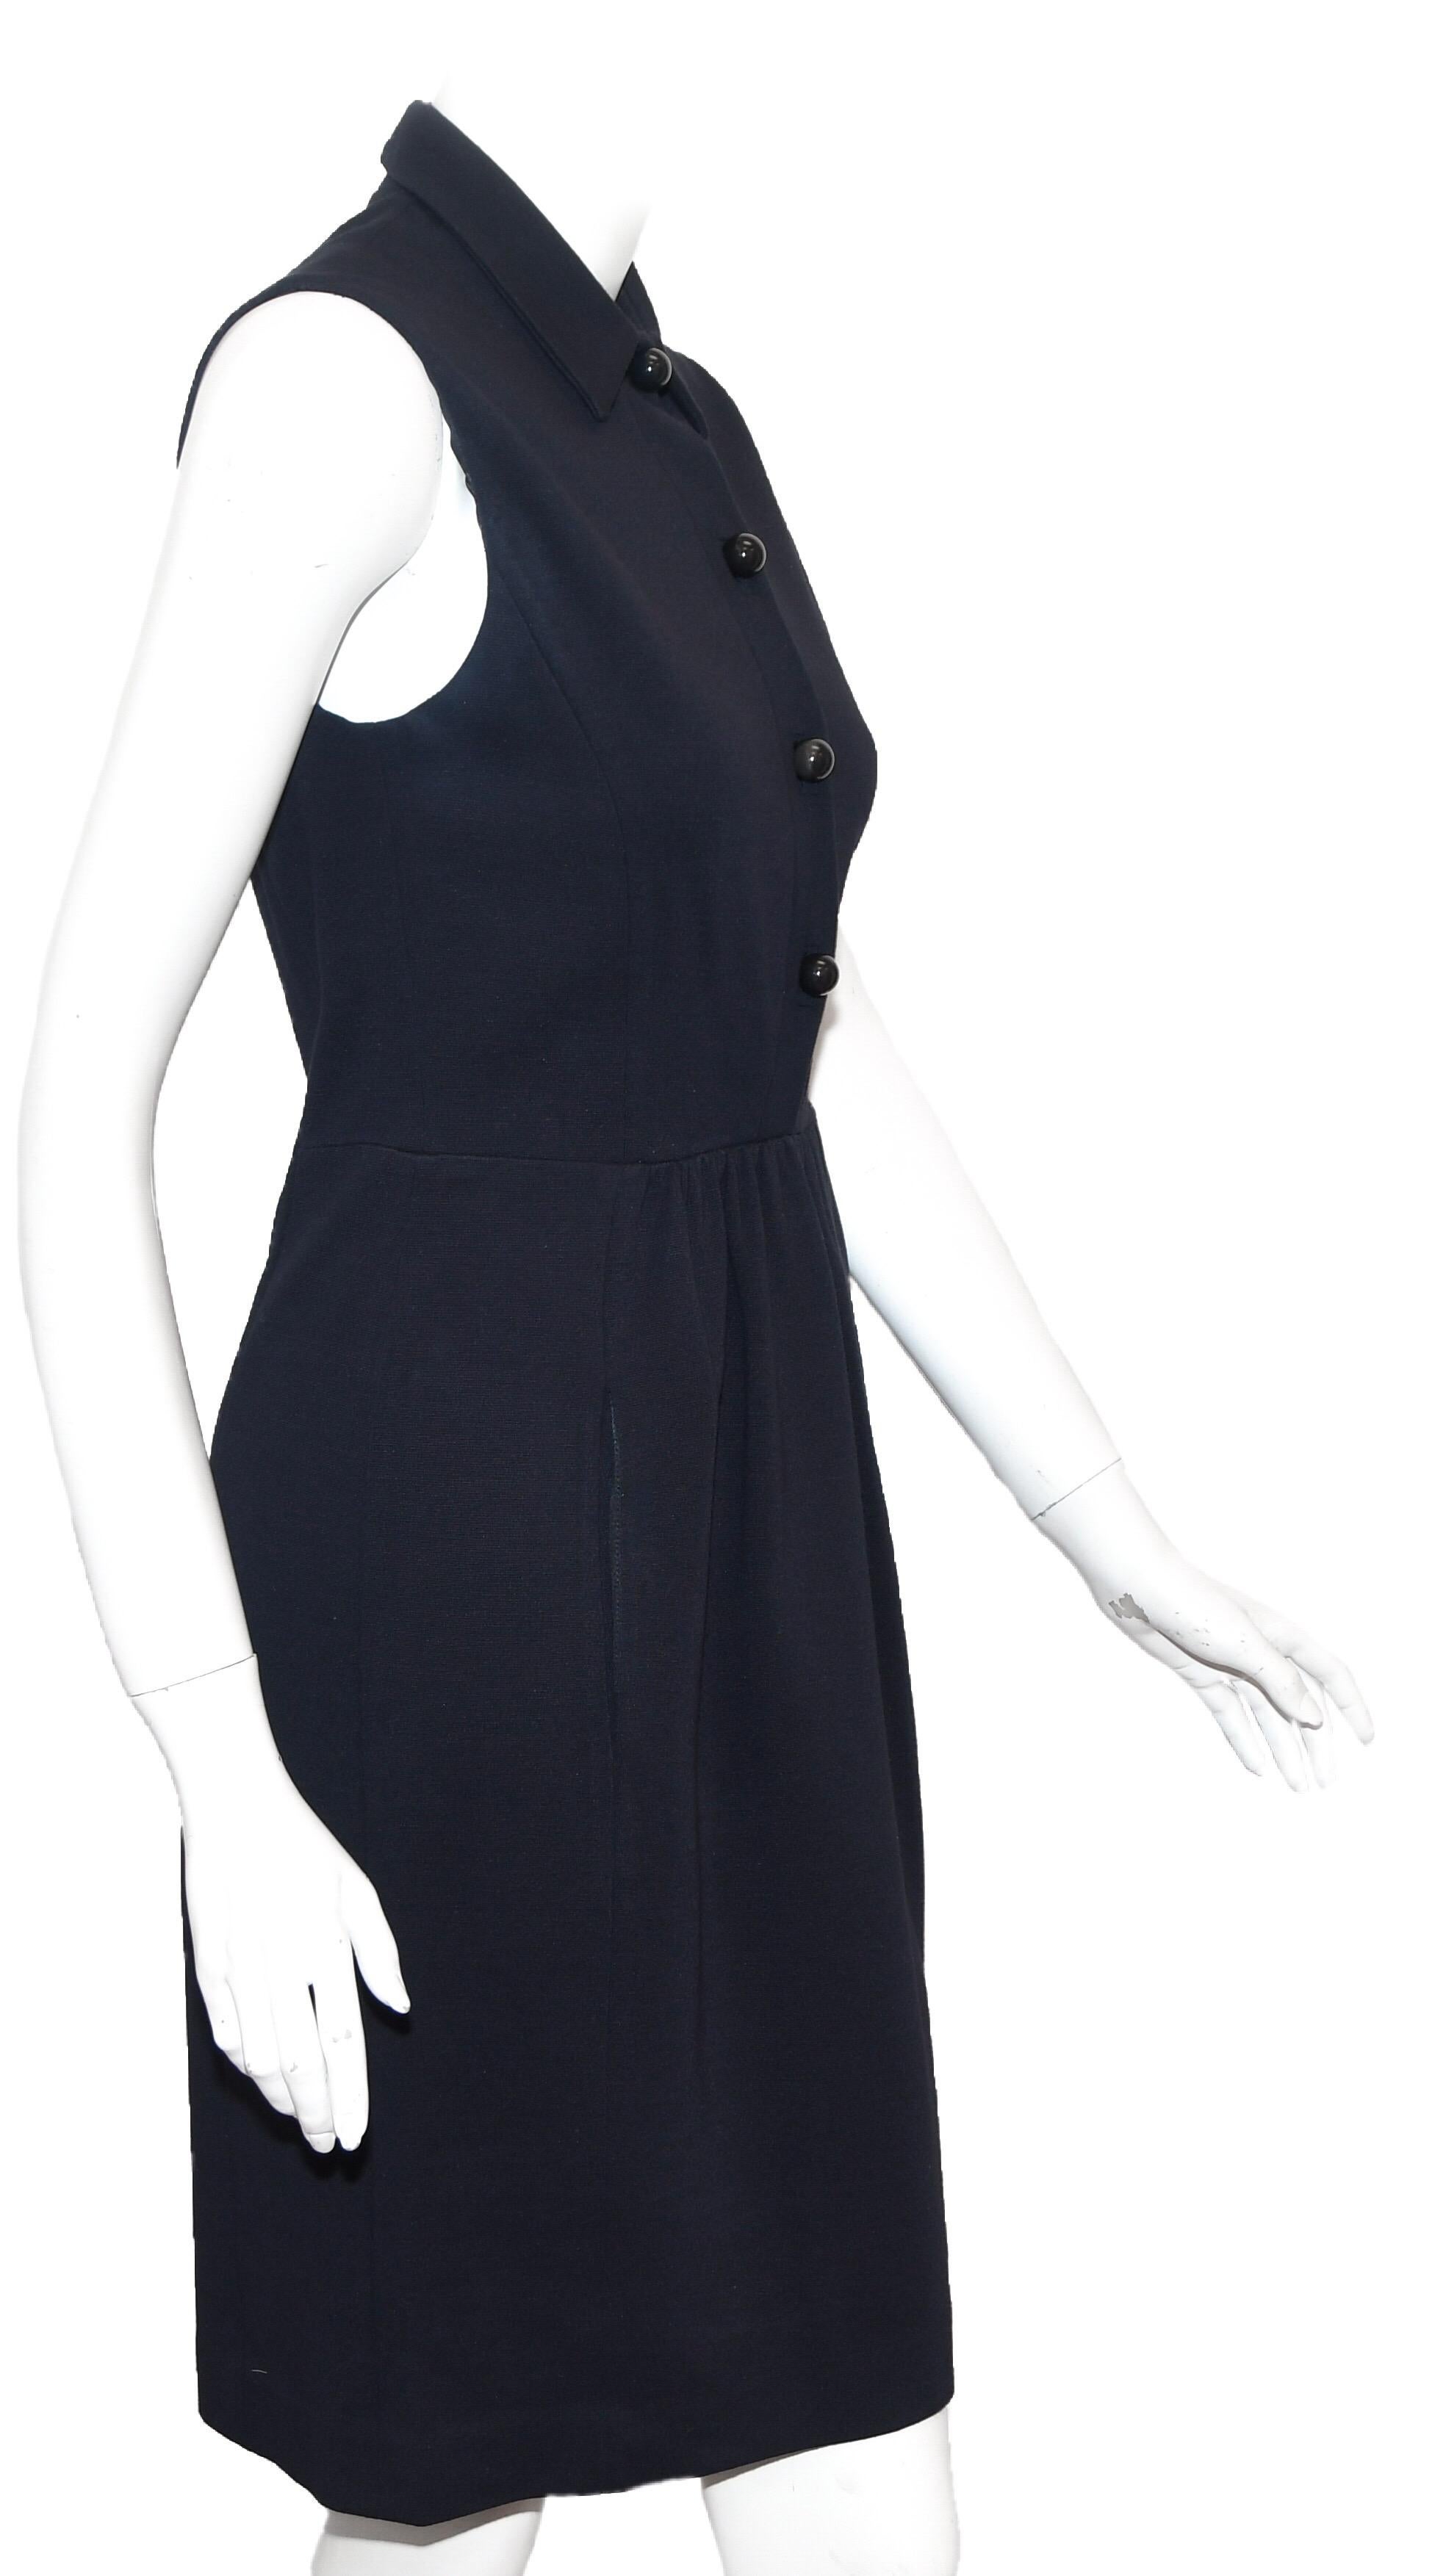 Prada shirt collar navy blue dress is gathered at the waist and has a shirt collar.  This is a casual and transitional dress that can go from summer to fall by just adding a jacket or sweater.  5 buttons for front closure.  Bodice is lined. 